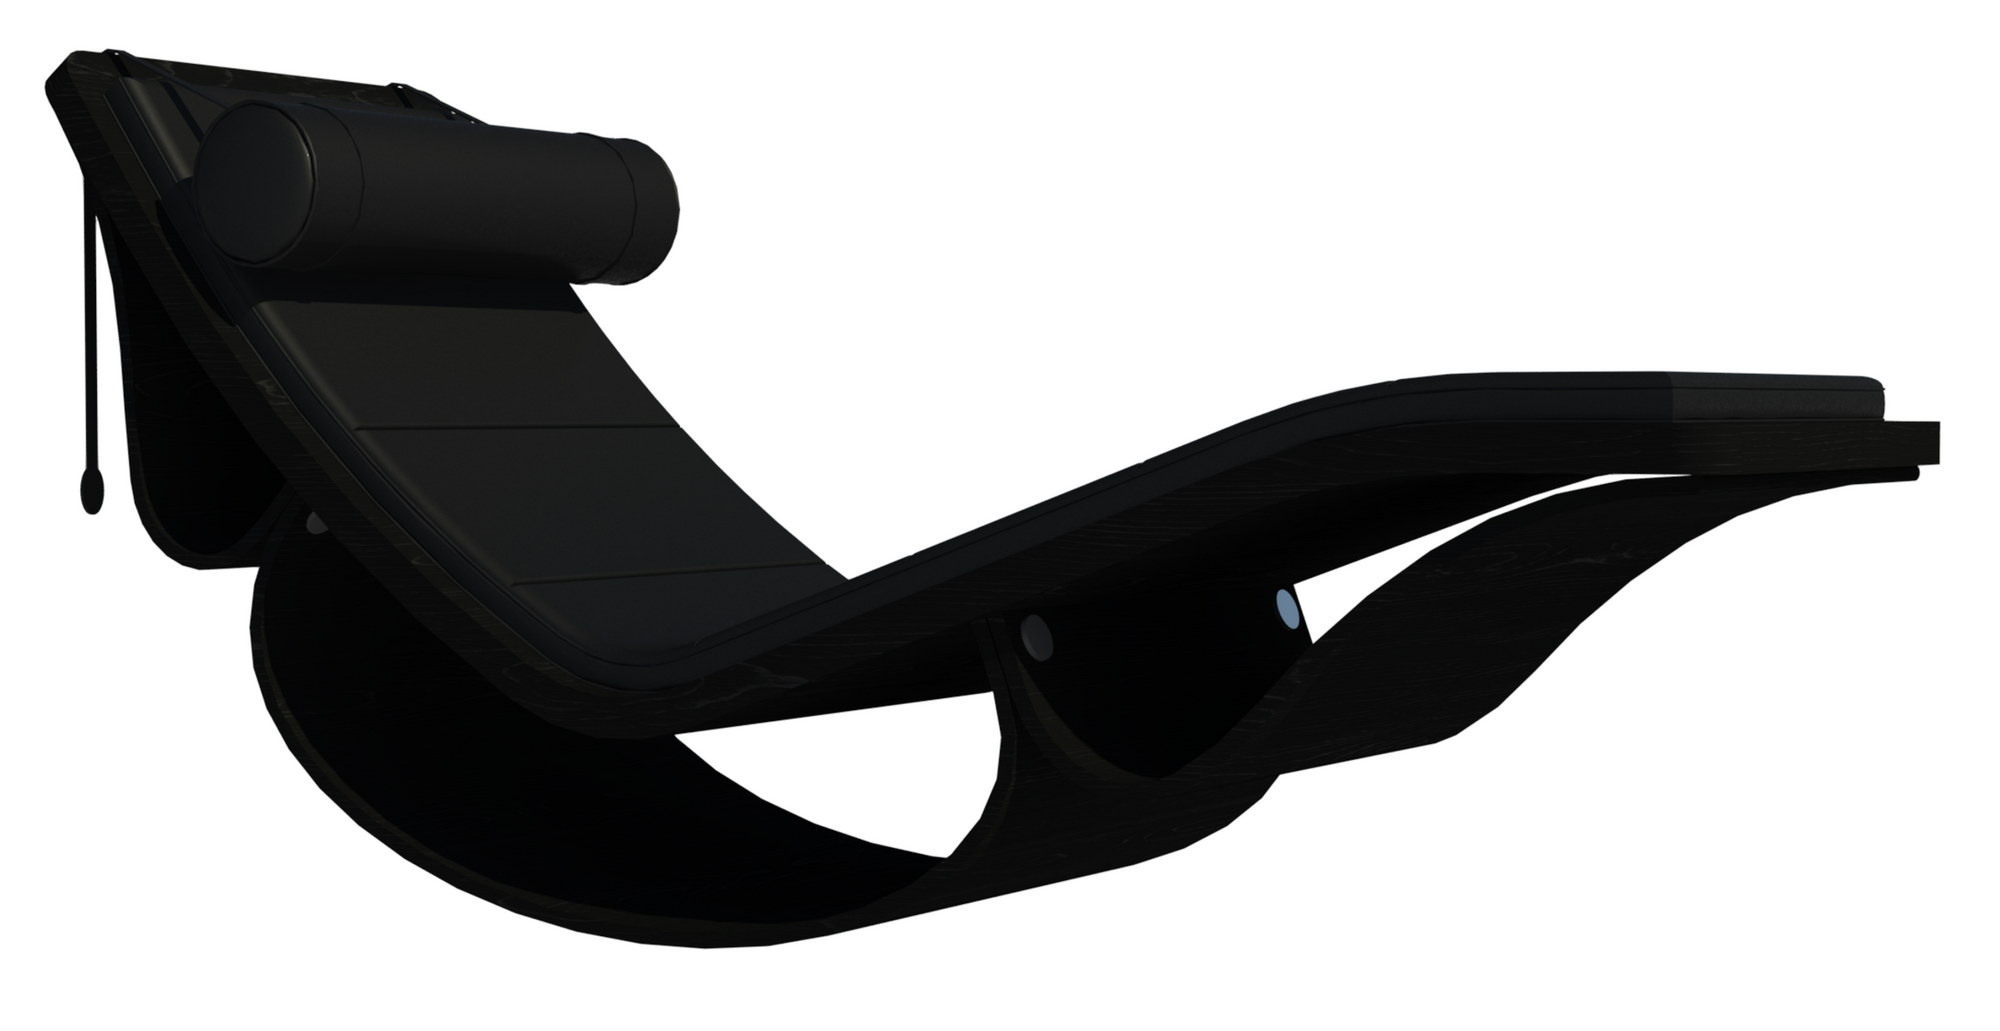 Revit raytrace showing the Rio chaise lounge chair.